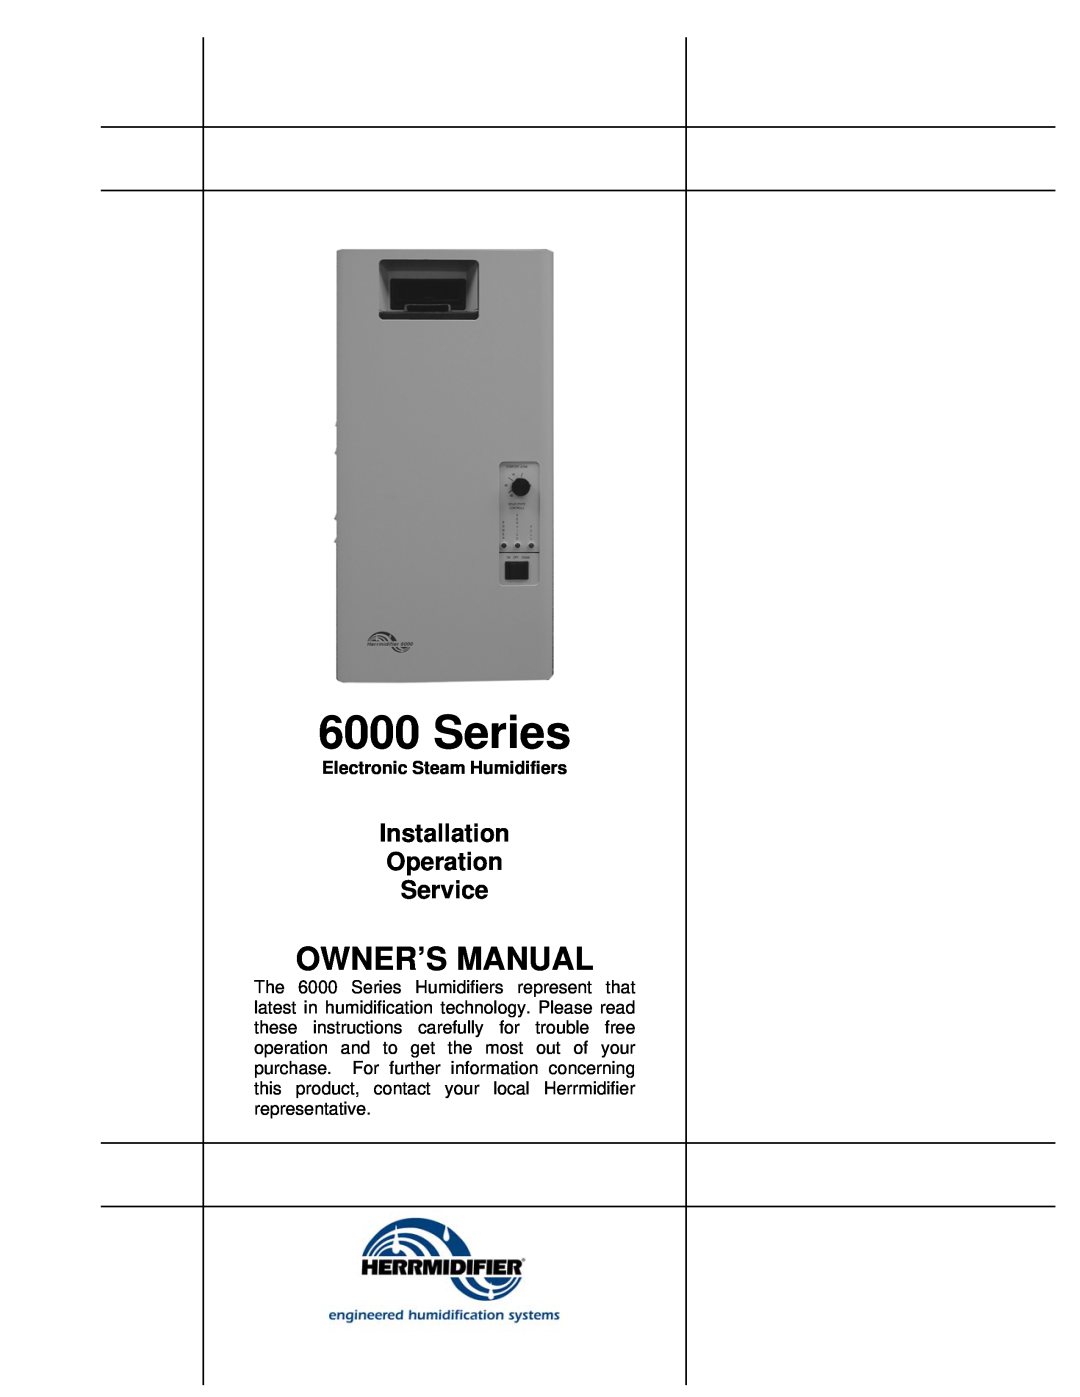 Herrmidifier Co 6000 owner manual Series, Installation Operation Service, Electronic Steam Humidifiers 